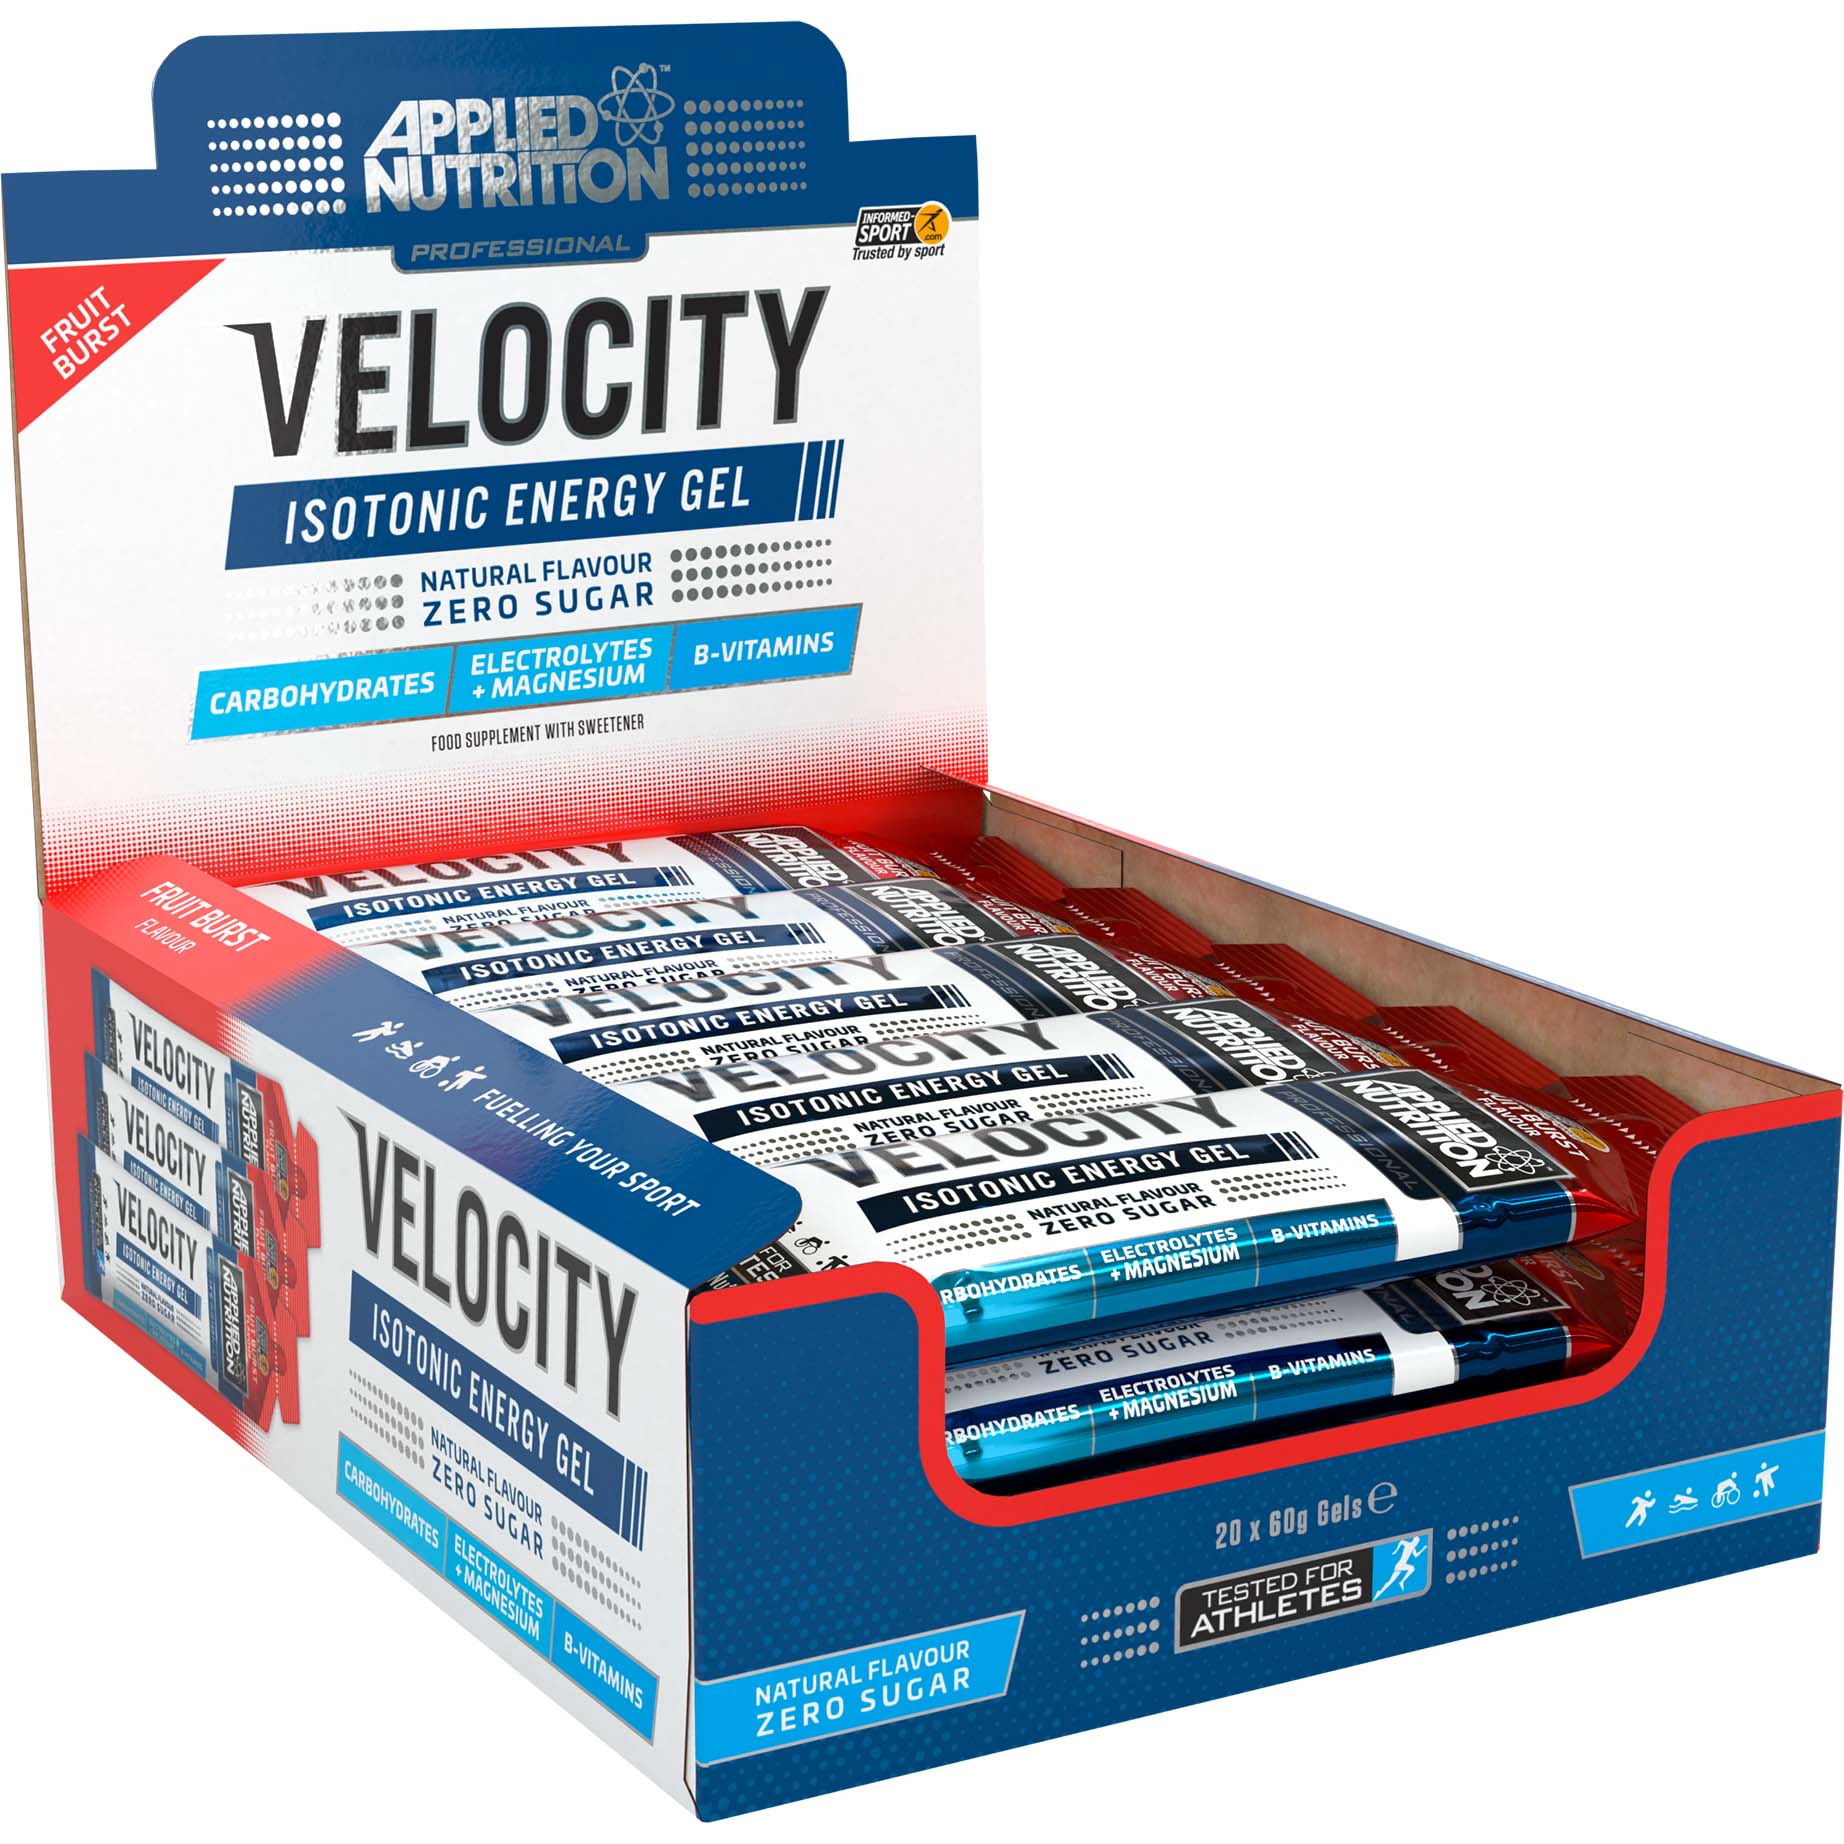 Applied Nutrition Velocity Isotonic Energy Gel, Fruit Burst, Box of 20 Pieces